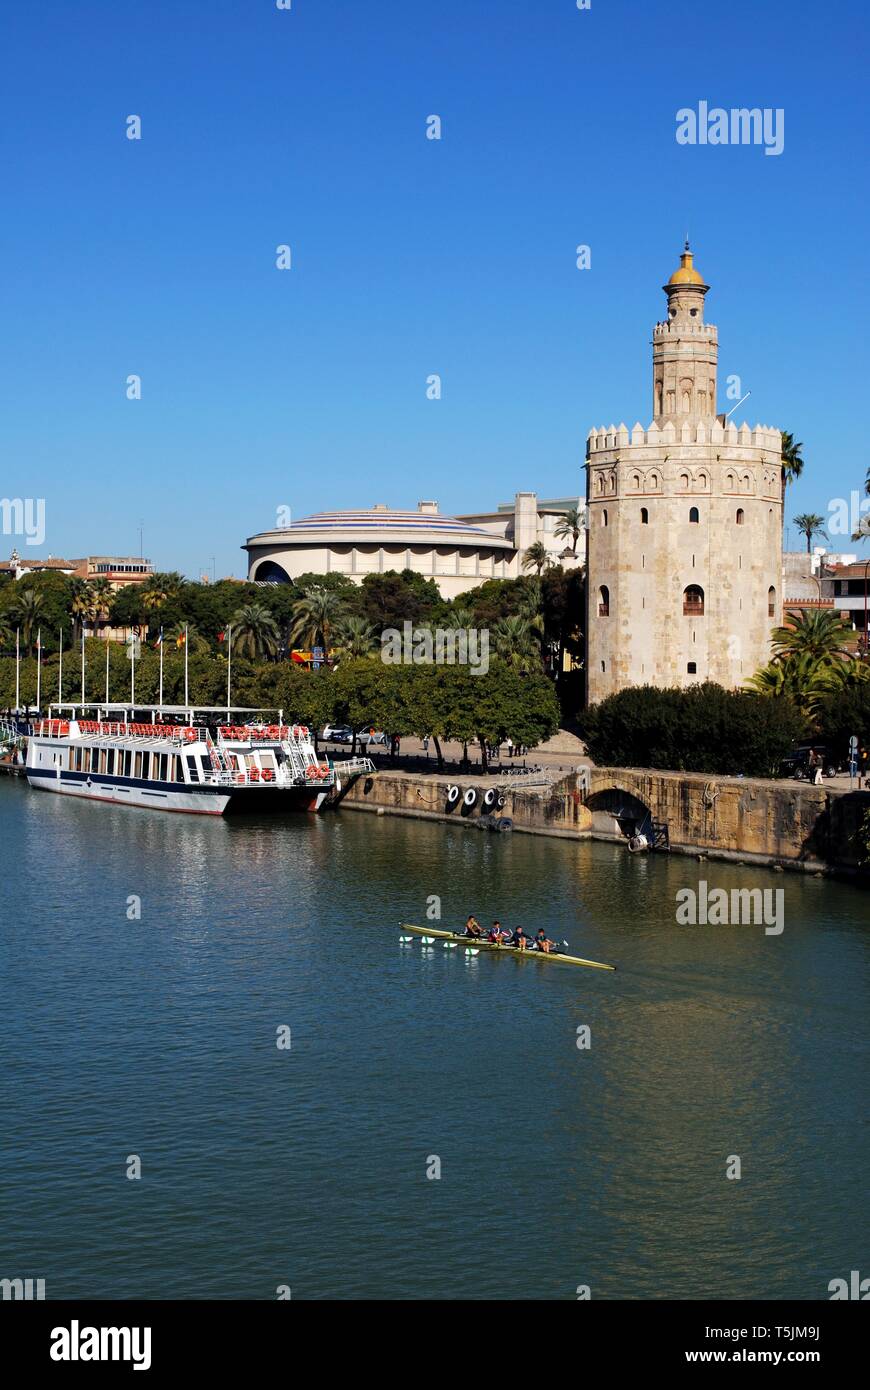 SEVILLE, SPAIN - NOVEMBER 15, 2008 - View of the Golden tower (Torre del Oro) along the Guadalquivir river with the Maestranza theatre to the rear, Se Stock Photo